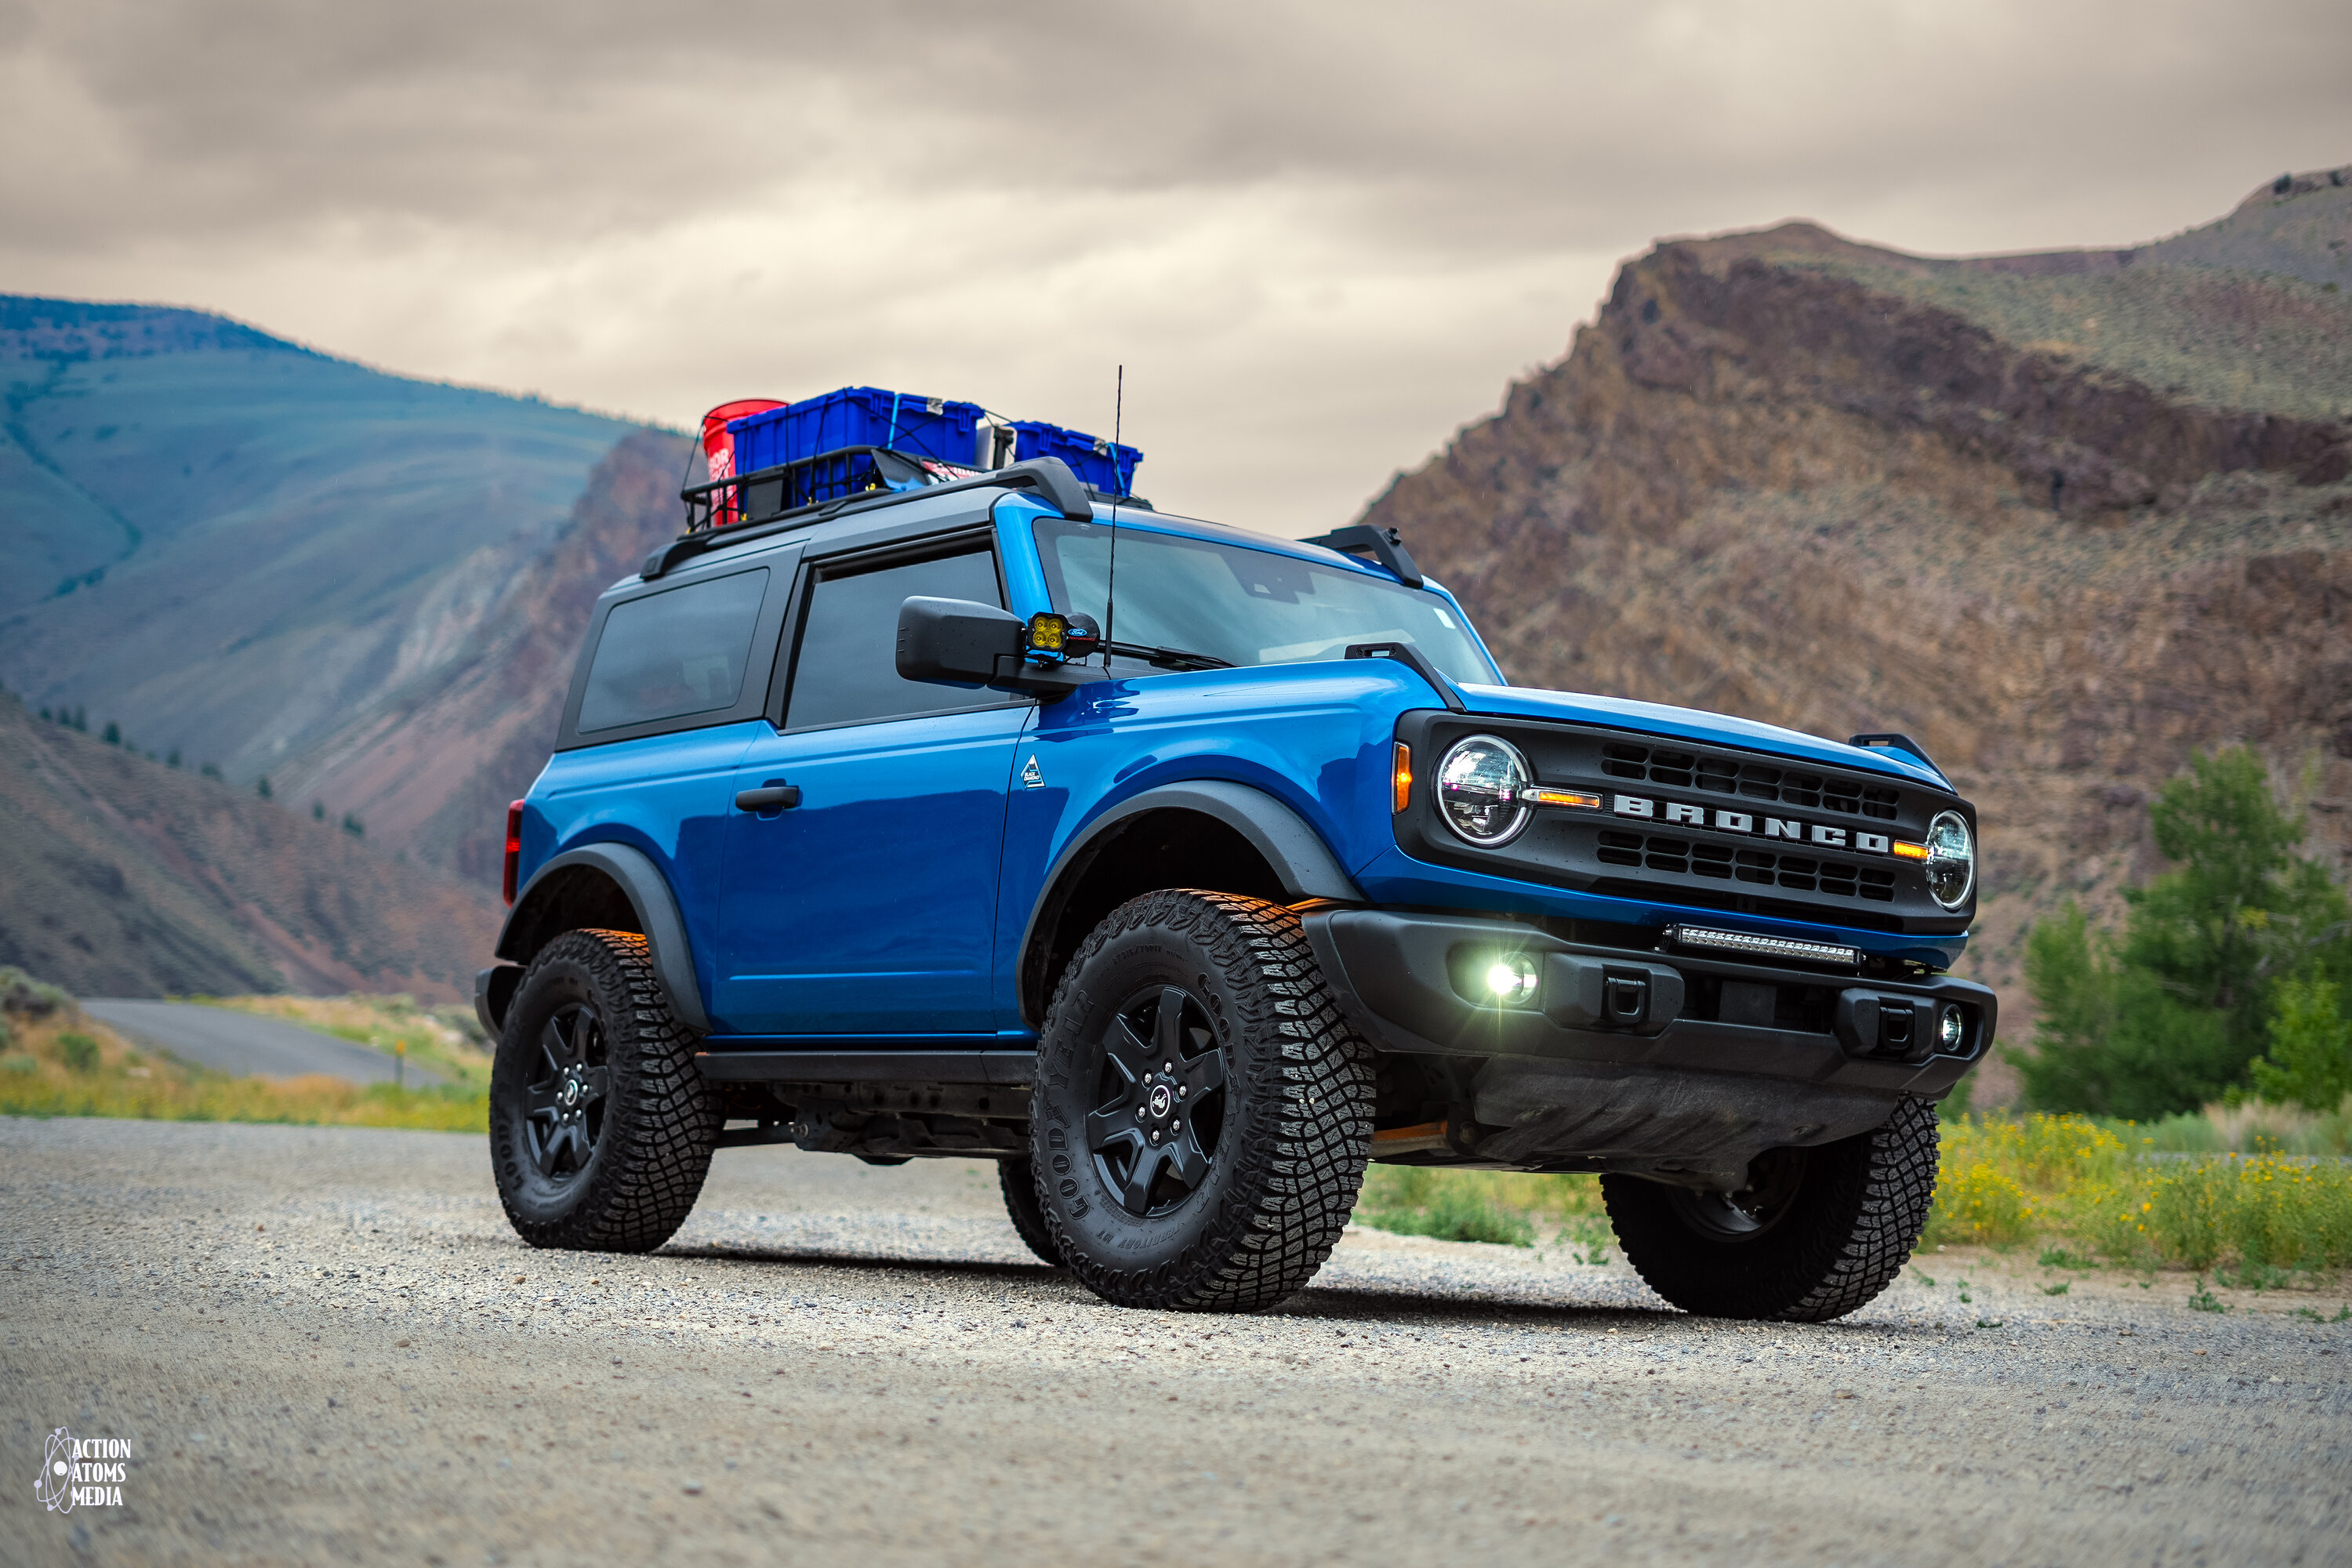 Ford Bronco 2 Door Broncos - What’s on your roof racks? [Photos Thread] Sawtooth Stewardship Recon 3